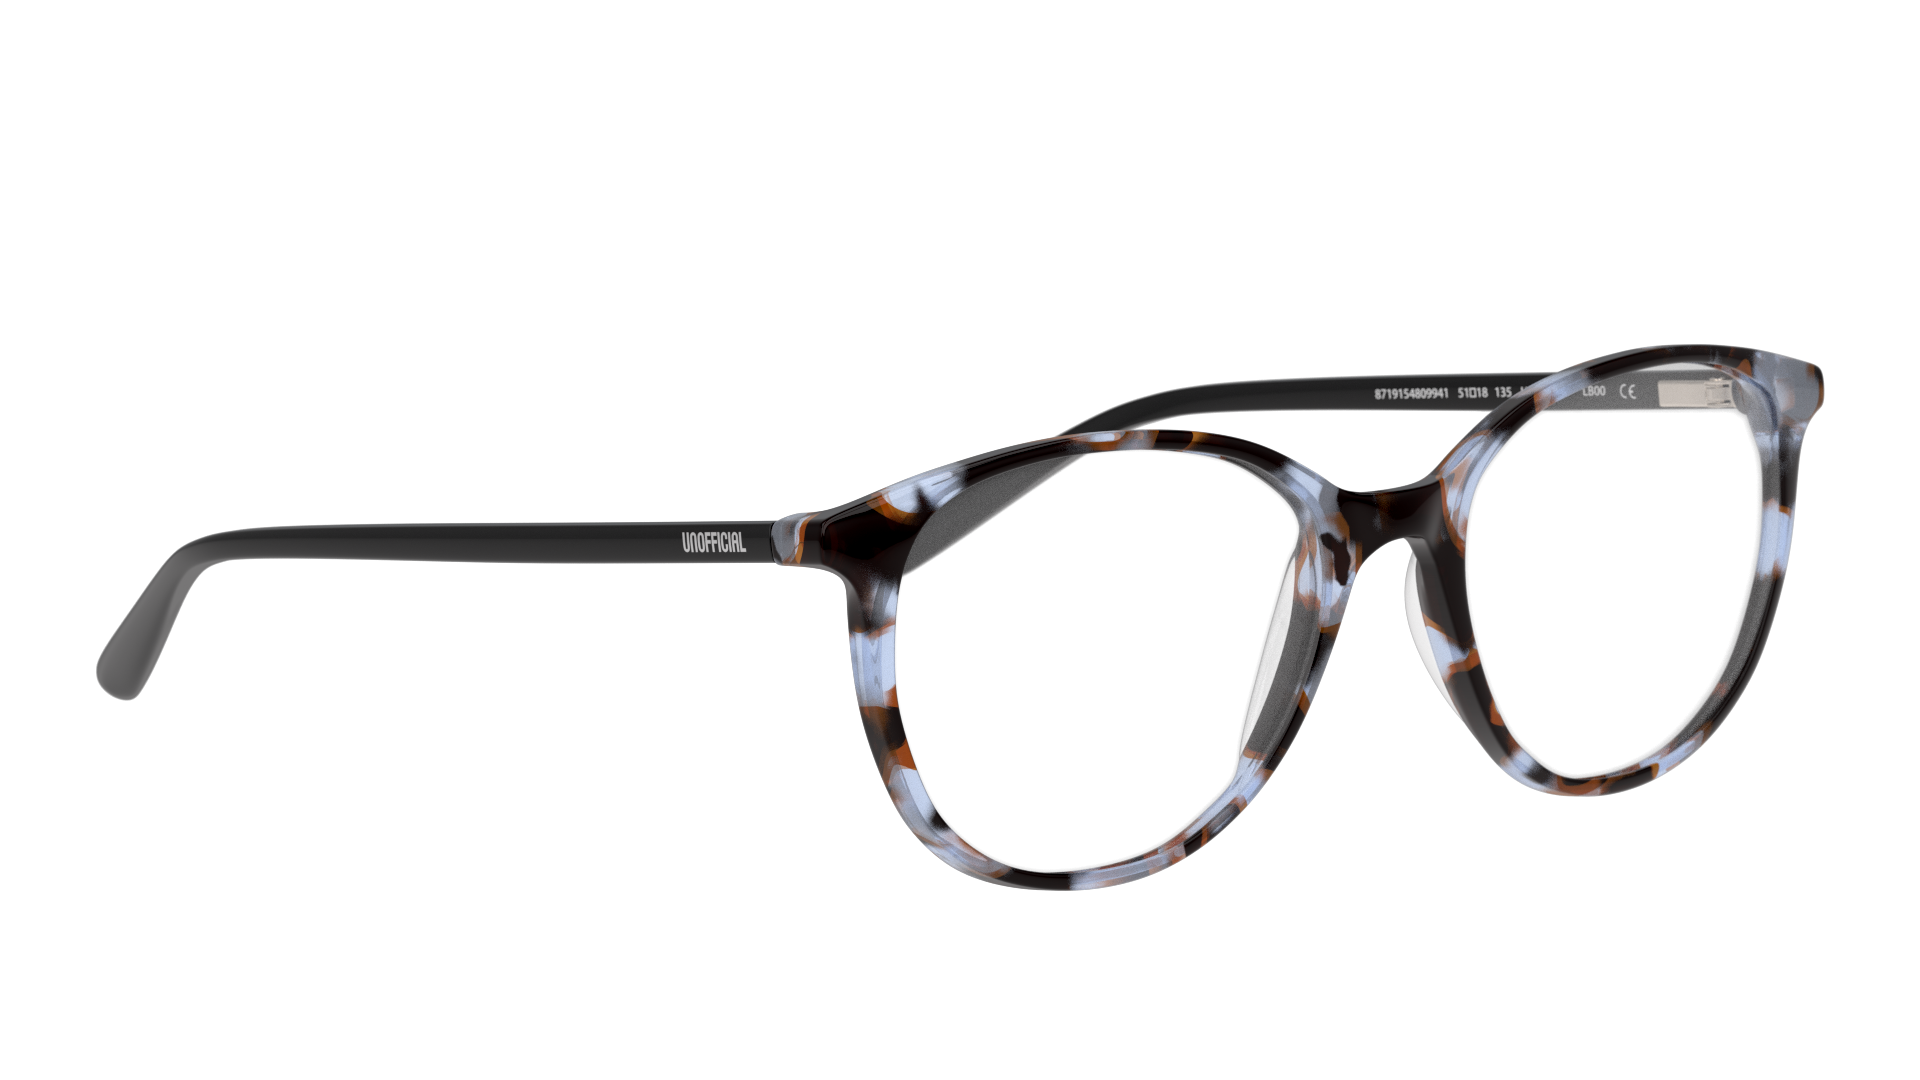 Angle_Right01 Unofficial UNOF0307 (LB00) Glasses Transparent / Havana